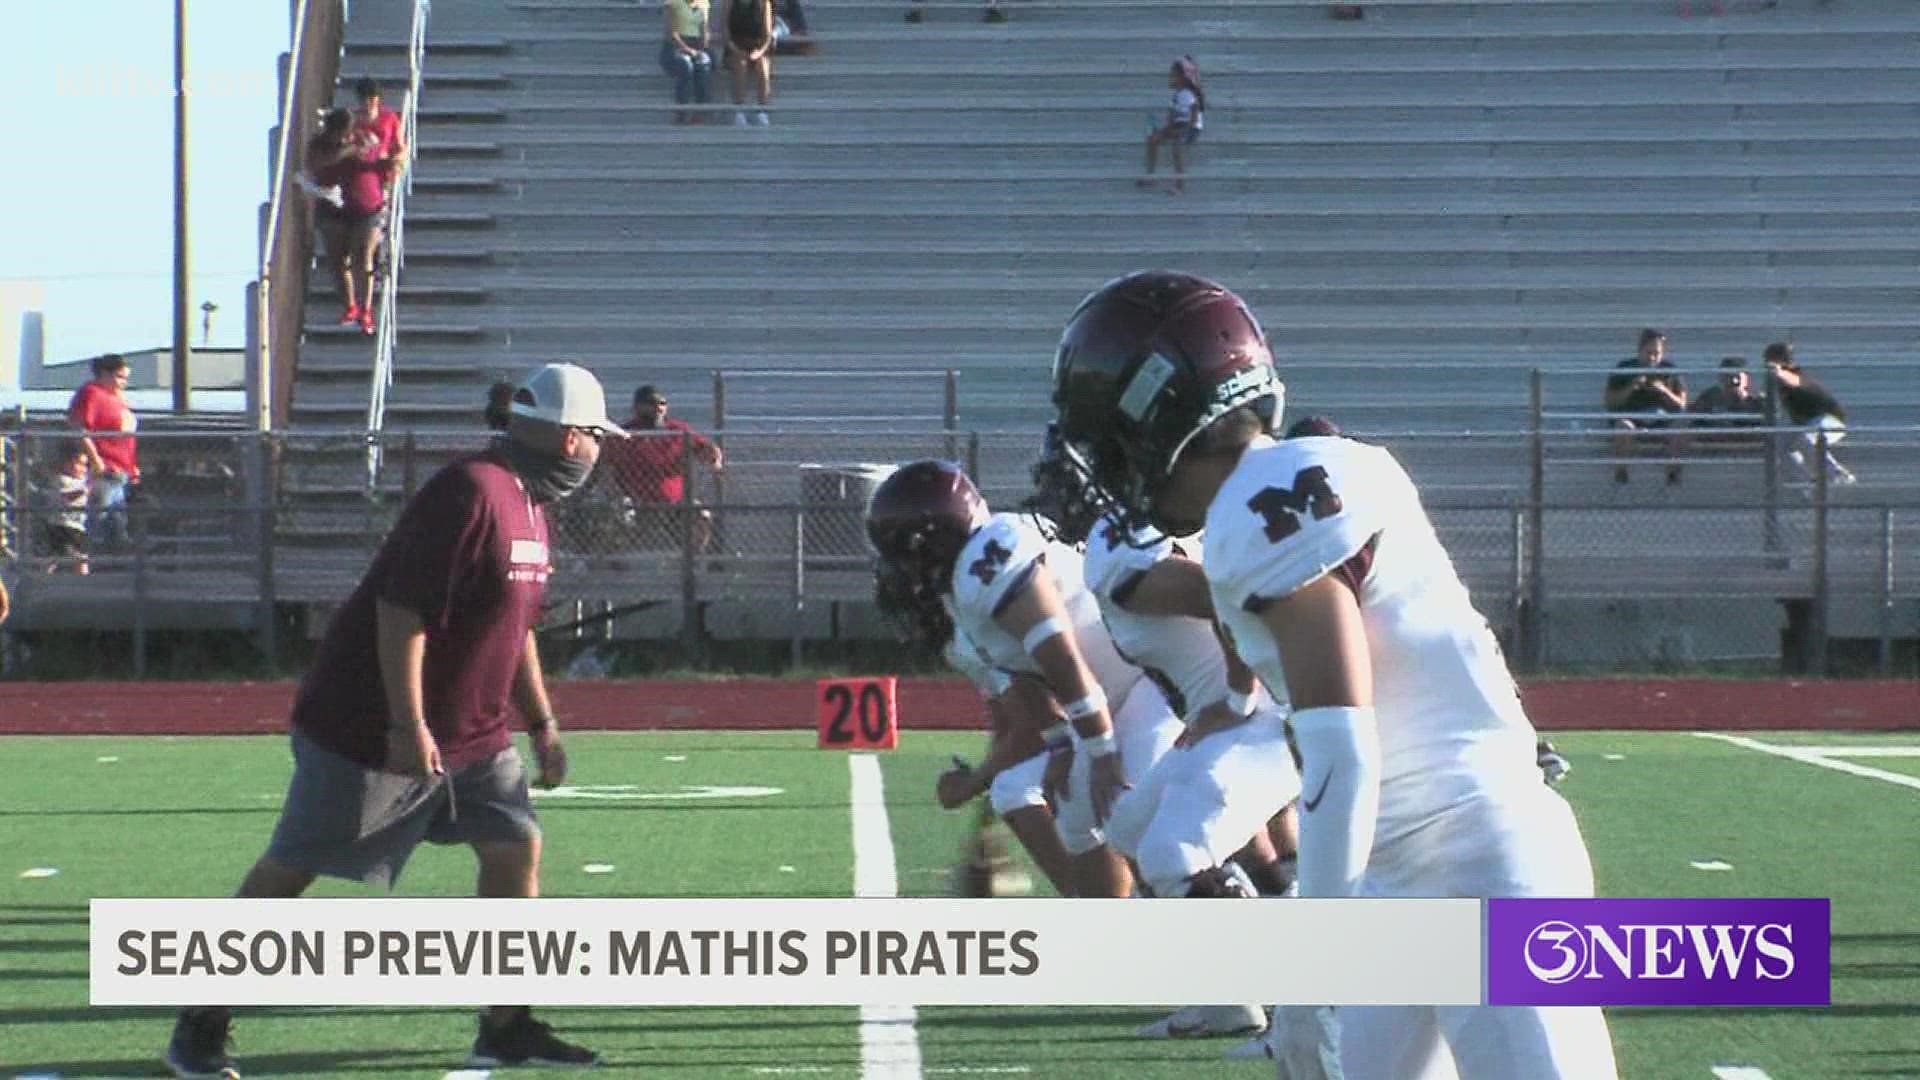 The Pirates just missed out on the postseason in a tough District 15-3A Div. I.